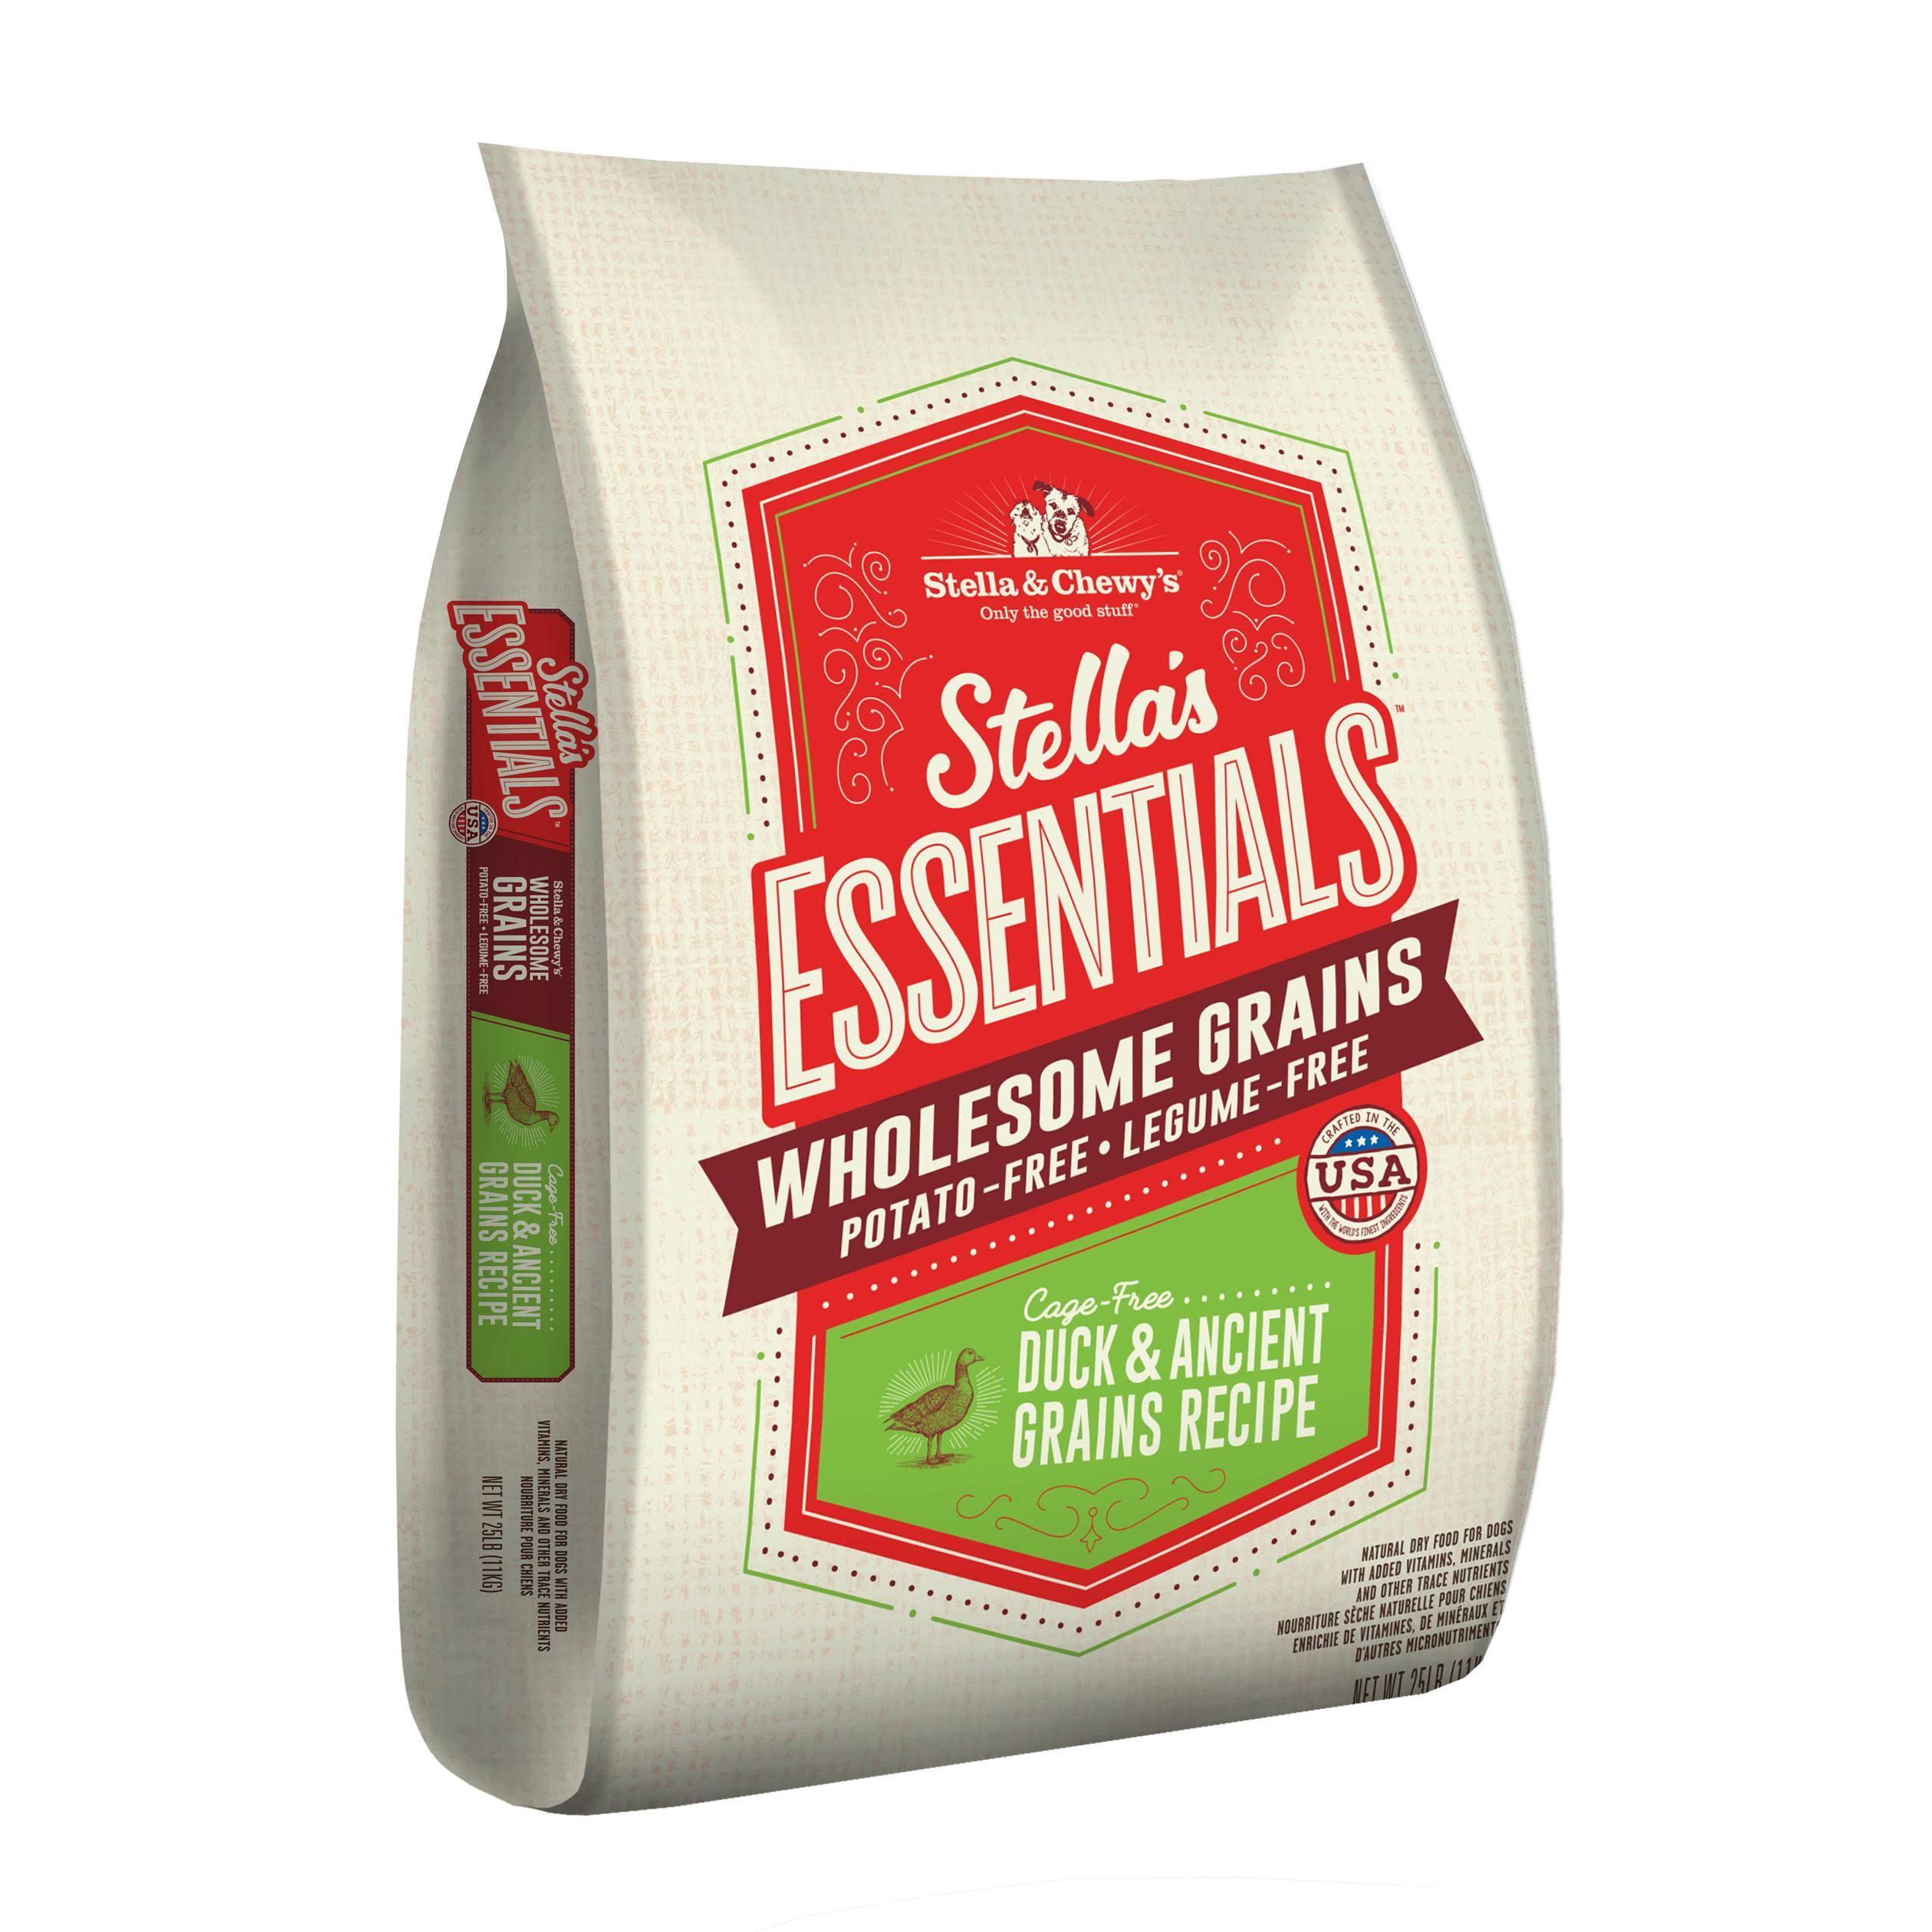 Stella & Chewy's Essentials Cage-Free Duck & Ancient Grains Recipe Dog Food - 25-Lbs.